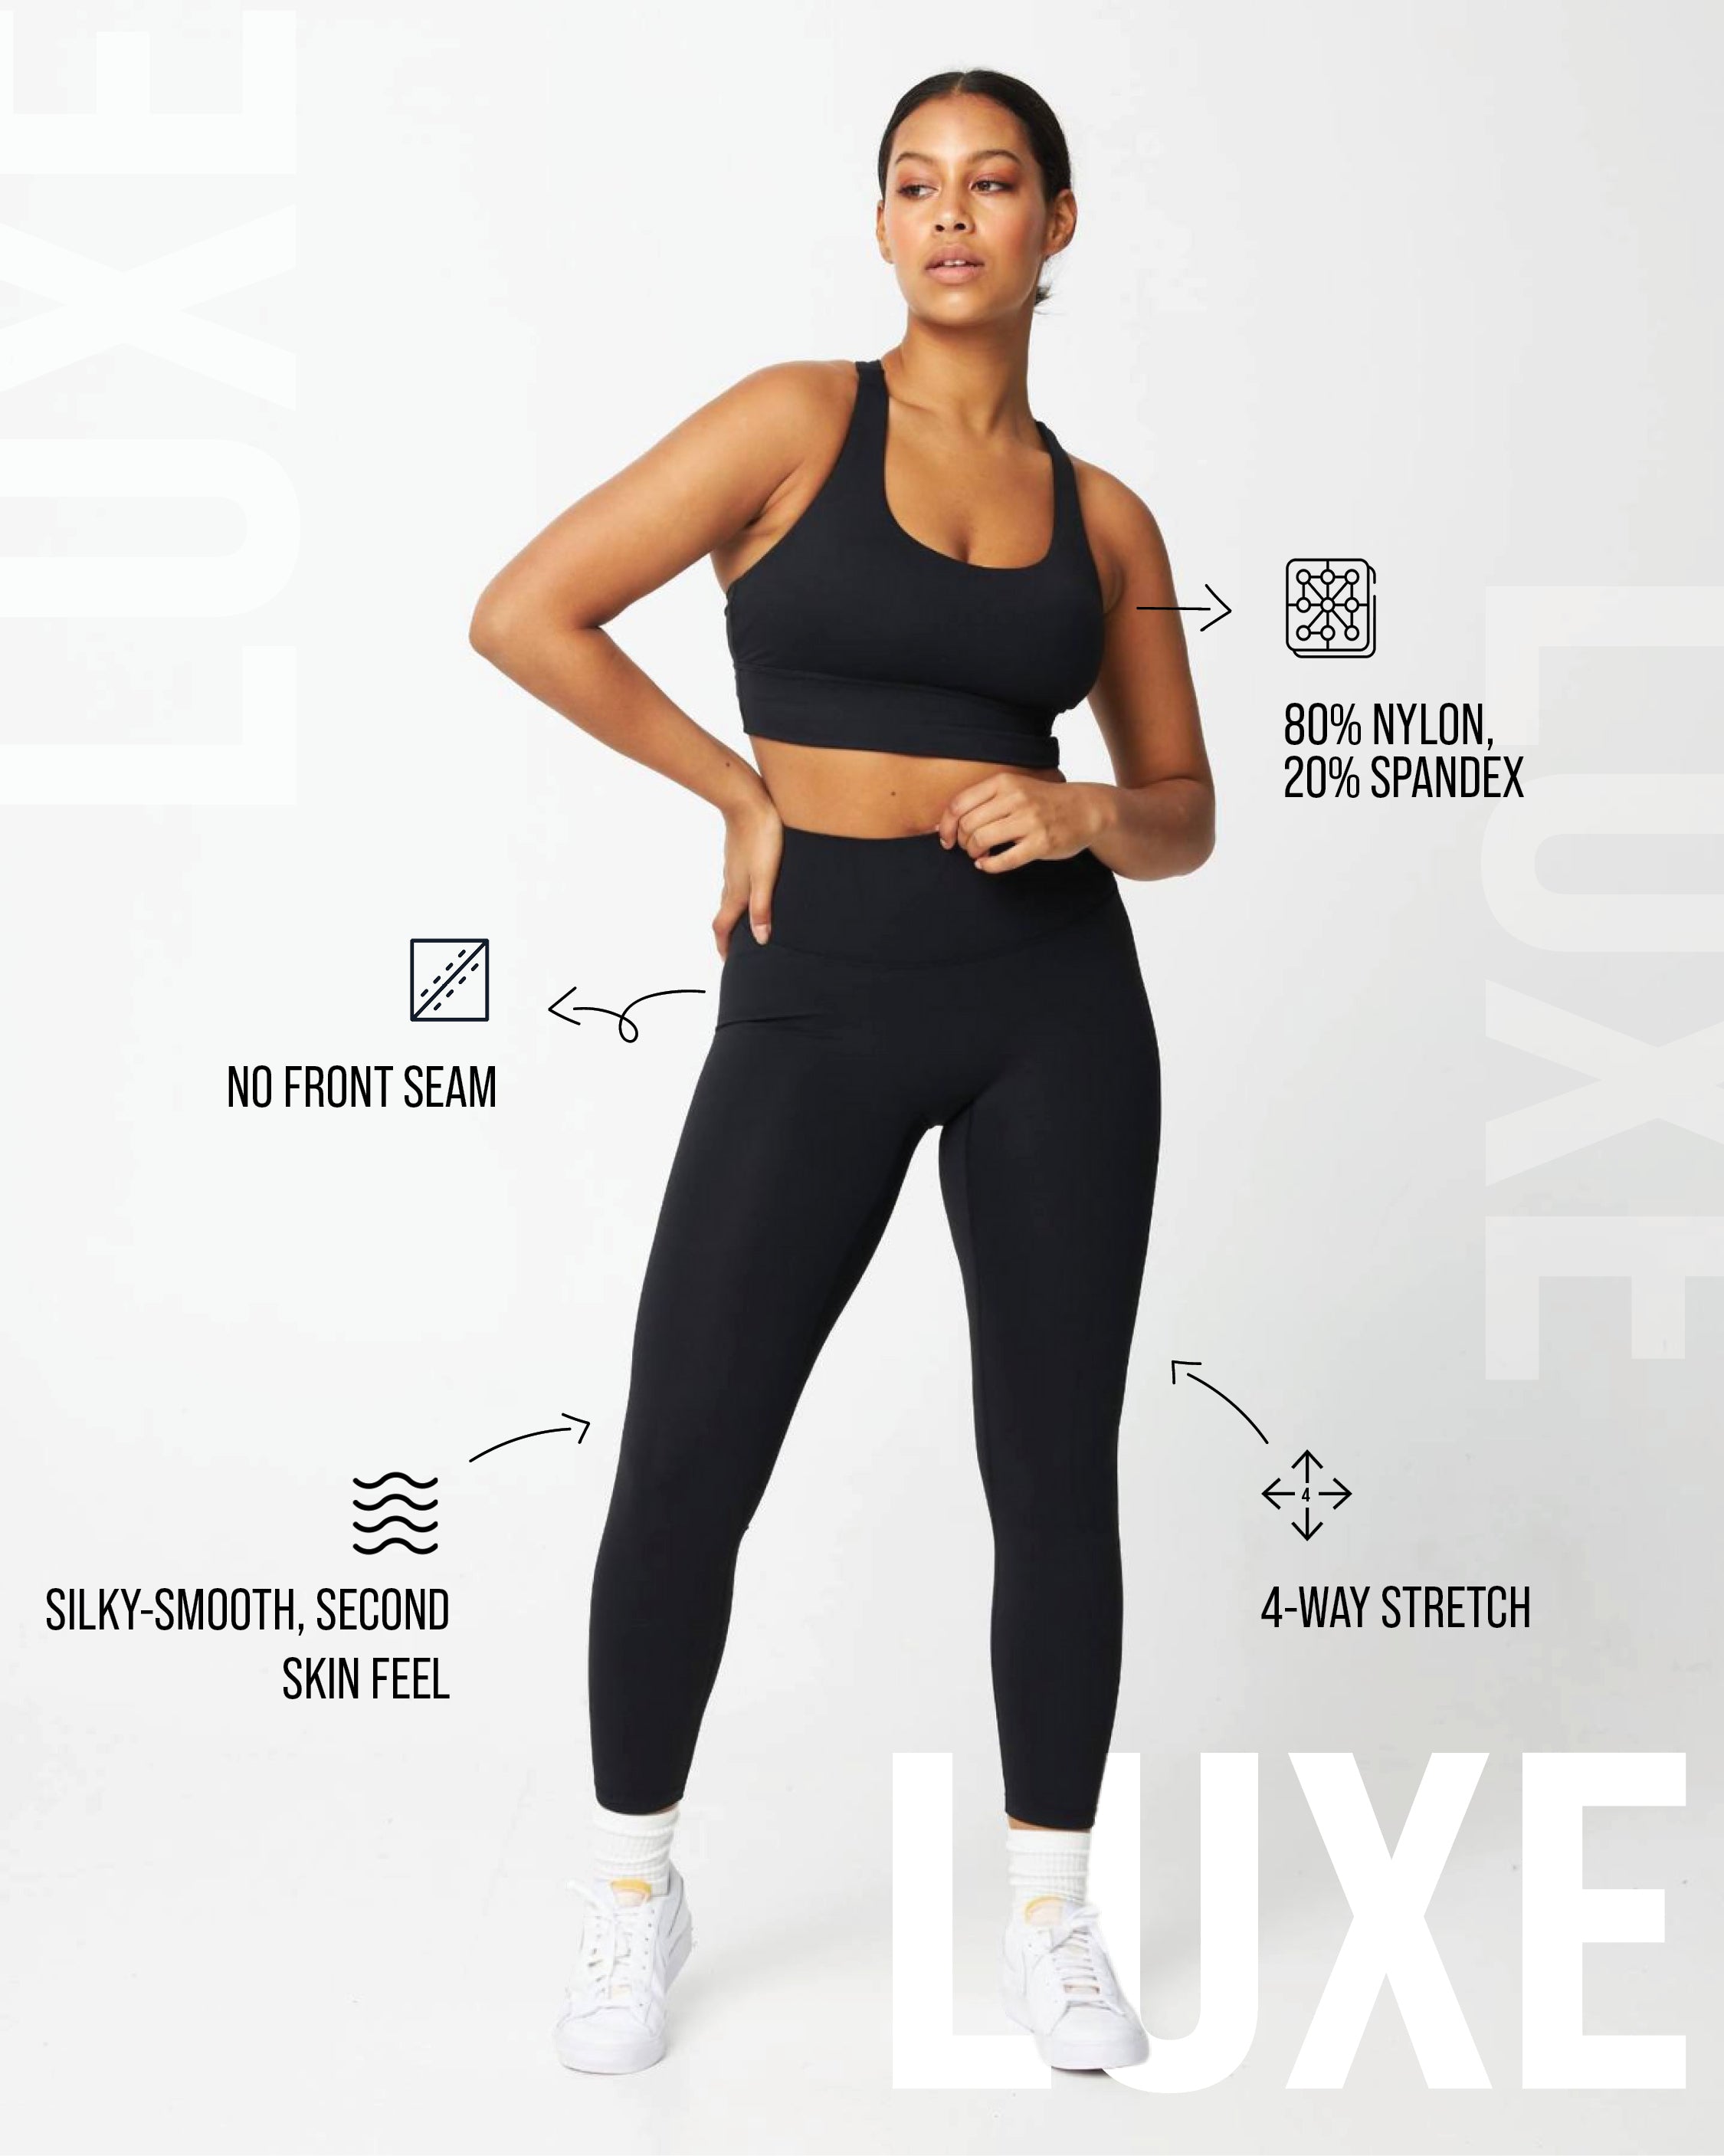 Everything You Need to Know About Luxe – MUSCLE REPUBLIC